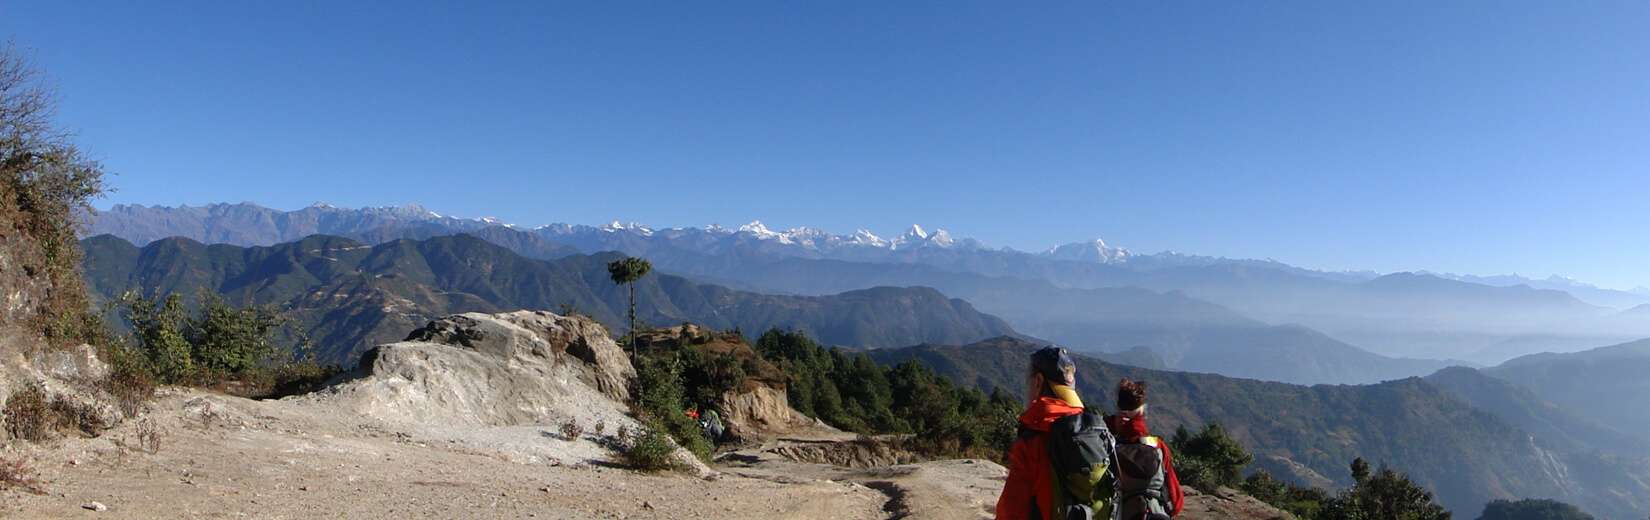 Top 10 best travel destination in Nepal to visit in 2021